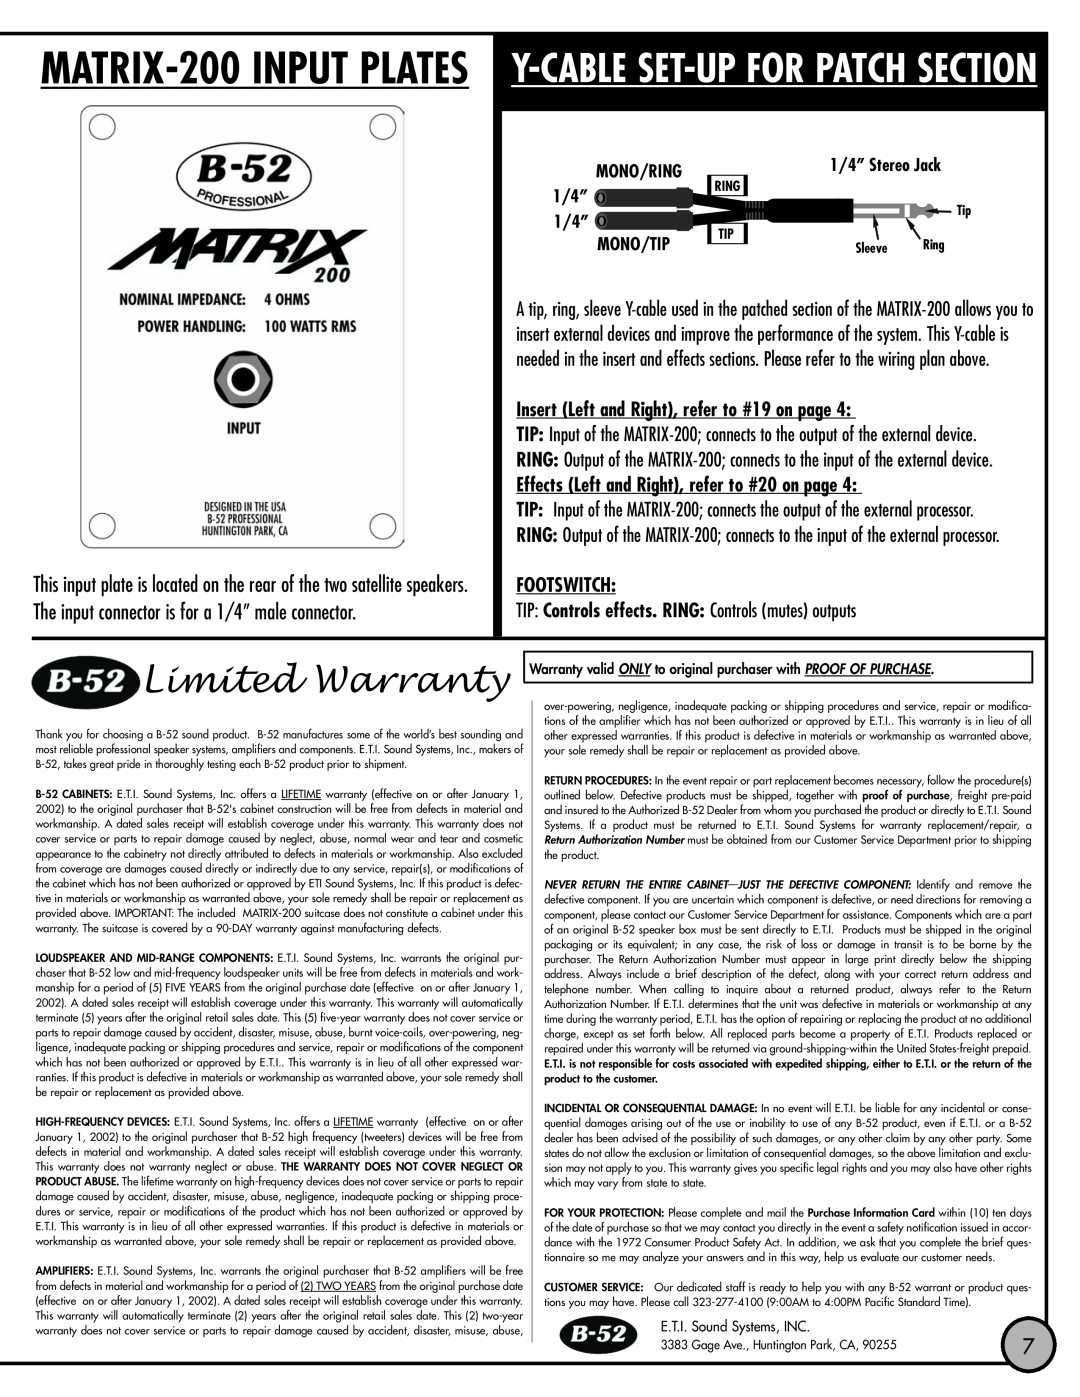 ETI Sound Systems, INC Matrix 200 Limited Warranty, The input connector is for a 1/4” male connector, Footswitch, Mono/Tip 